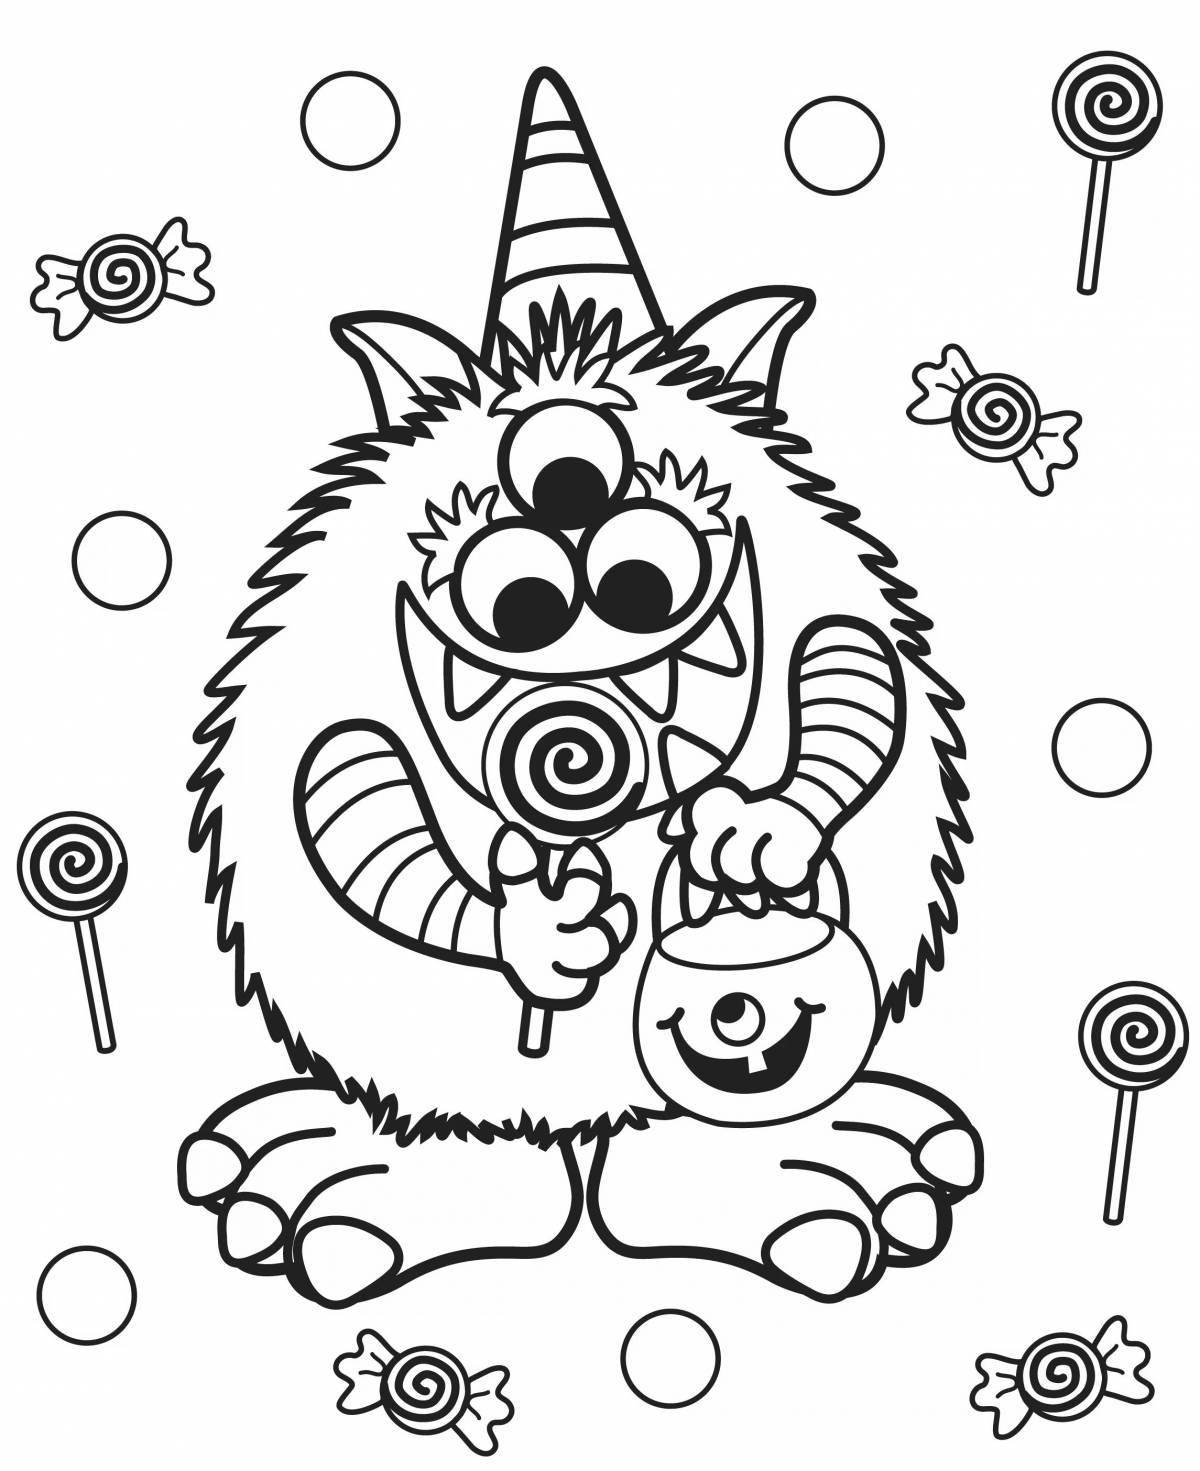 Playful babayka coloring book for children